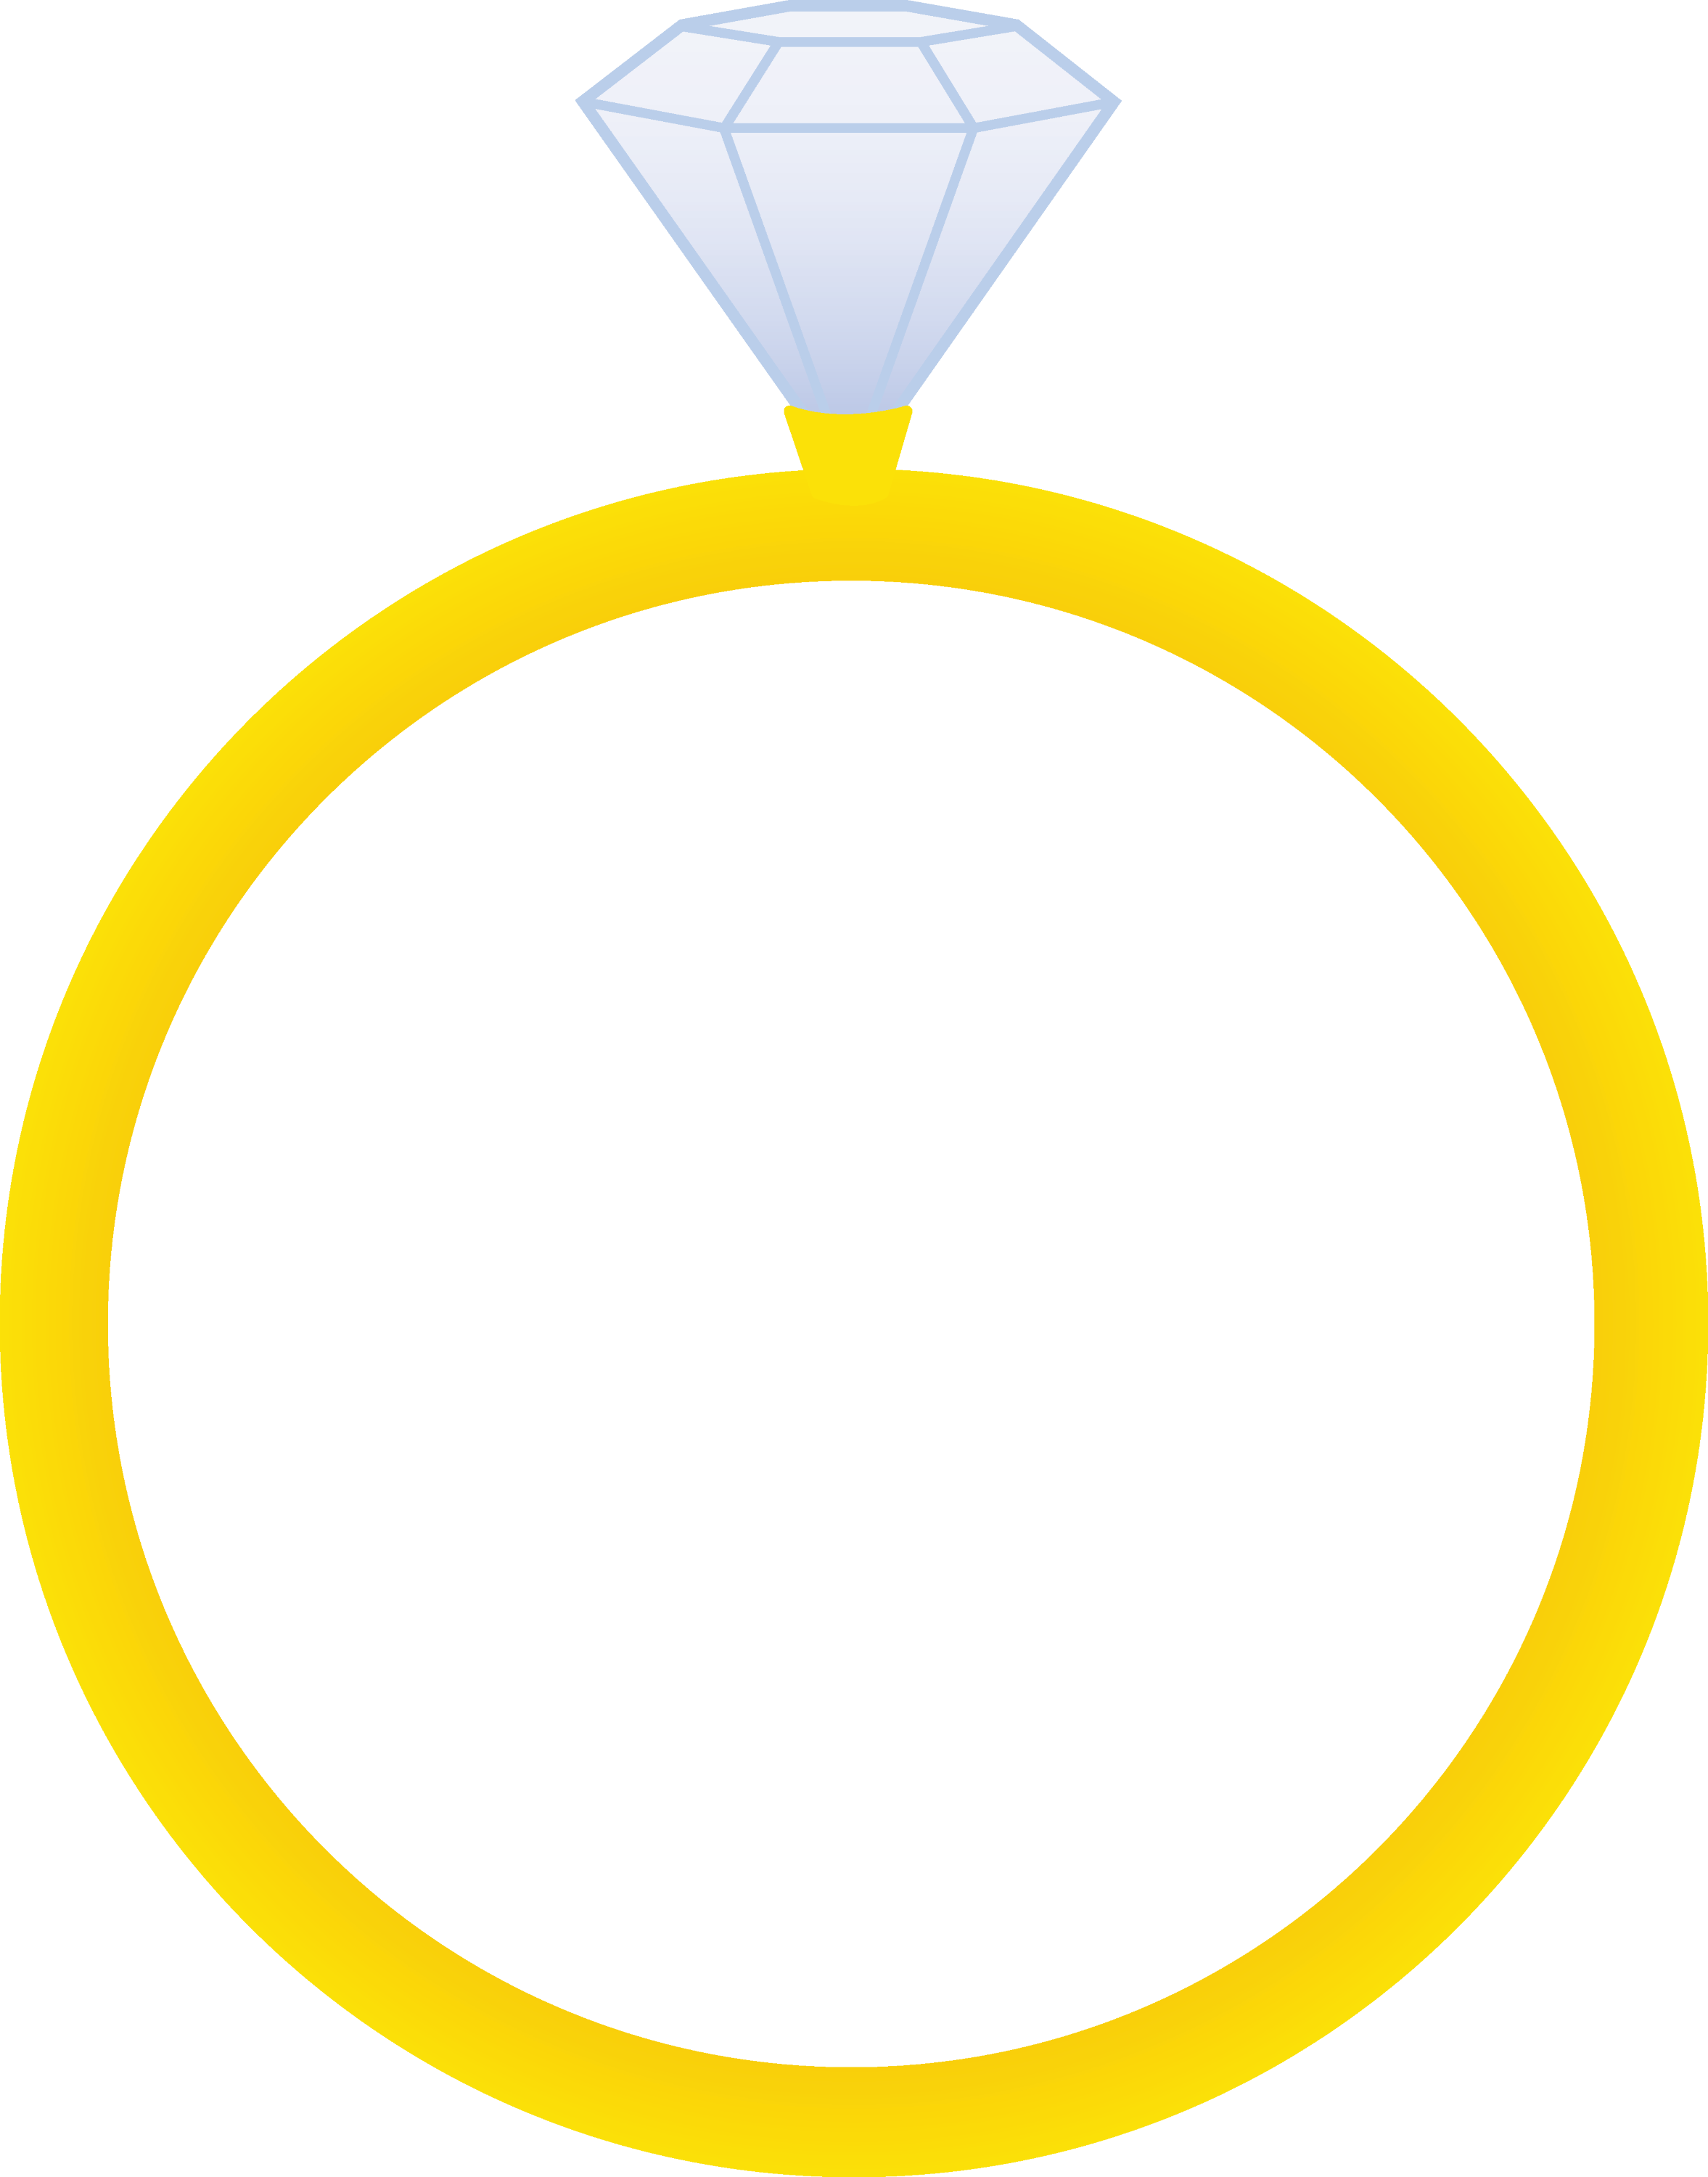 gold rings clipart - photo #33